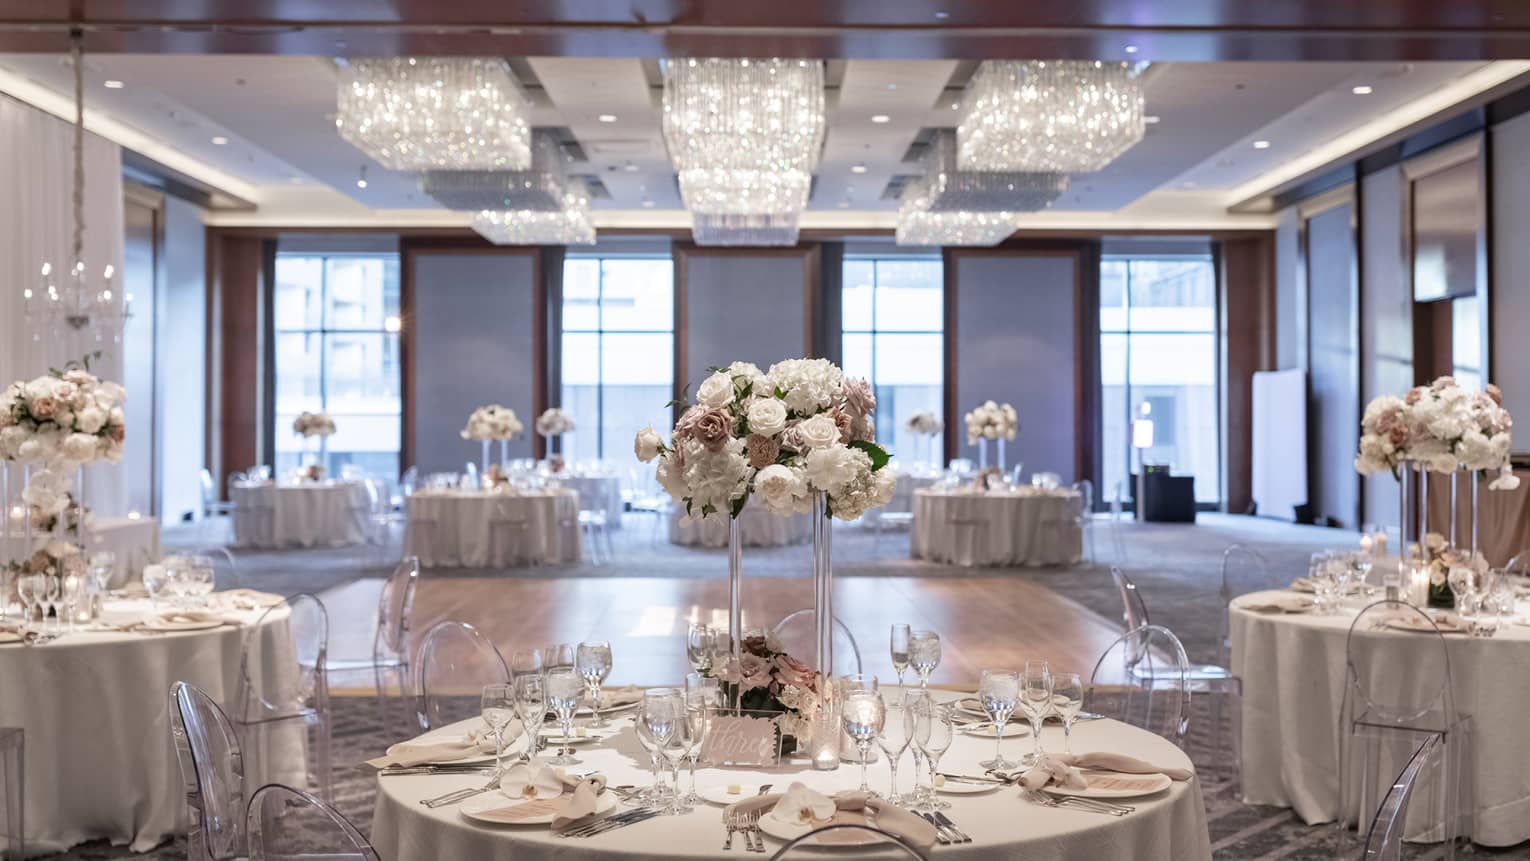 A well lit ballroom with ground tables and flower centerpieces and a section of hardwood floor in the middle.